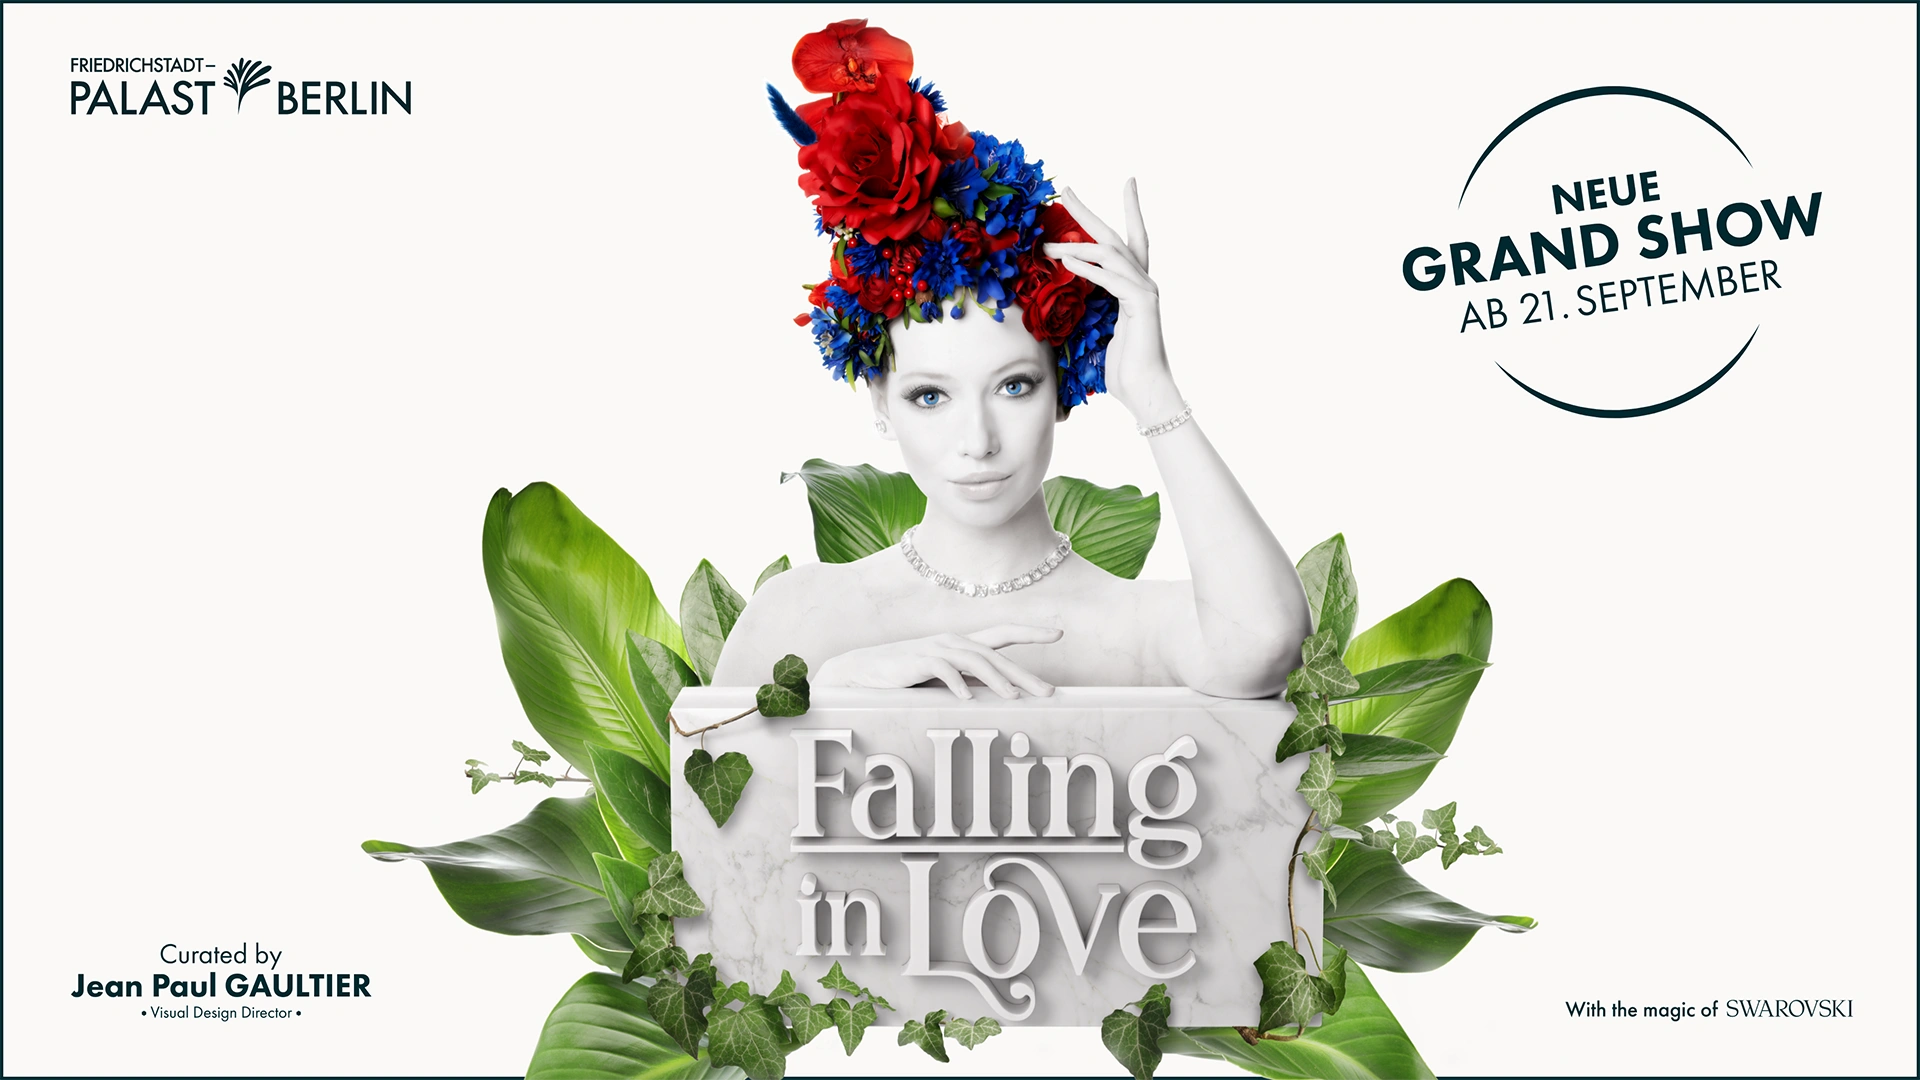 One picture shows the motif of the new Grand Show "Falling in Love" at the Friedrichstadt Palast Berlin.